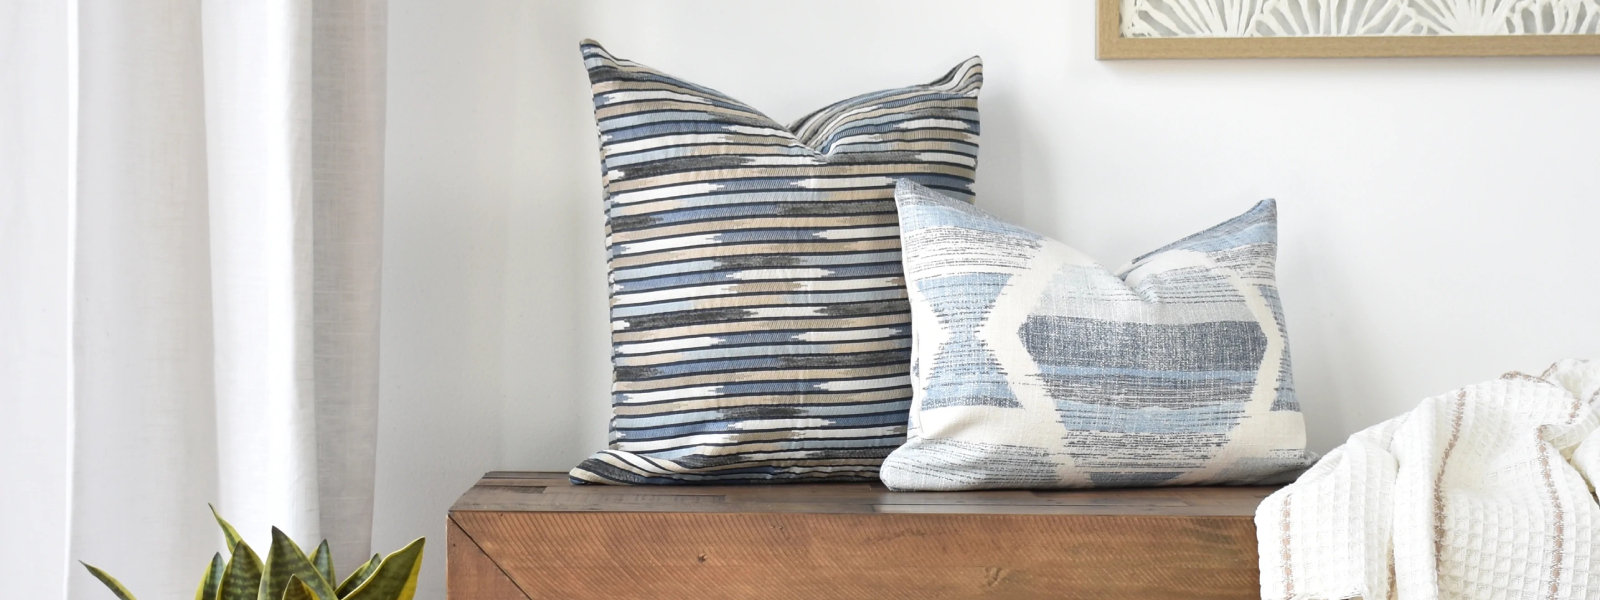 Accent pillows can add pizzazz to your home decor